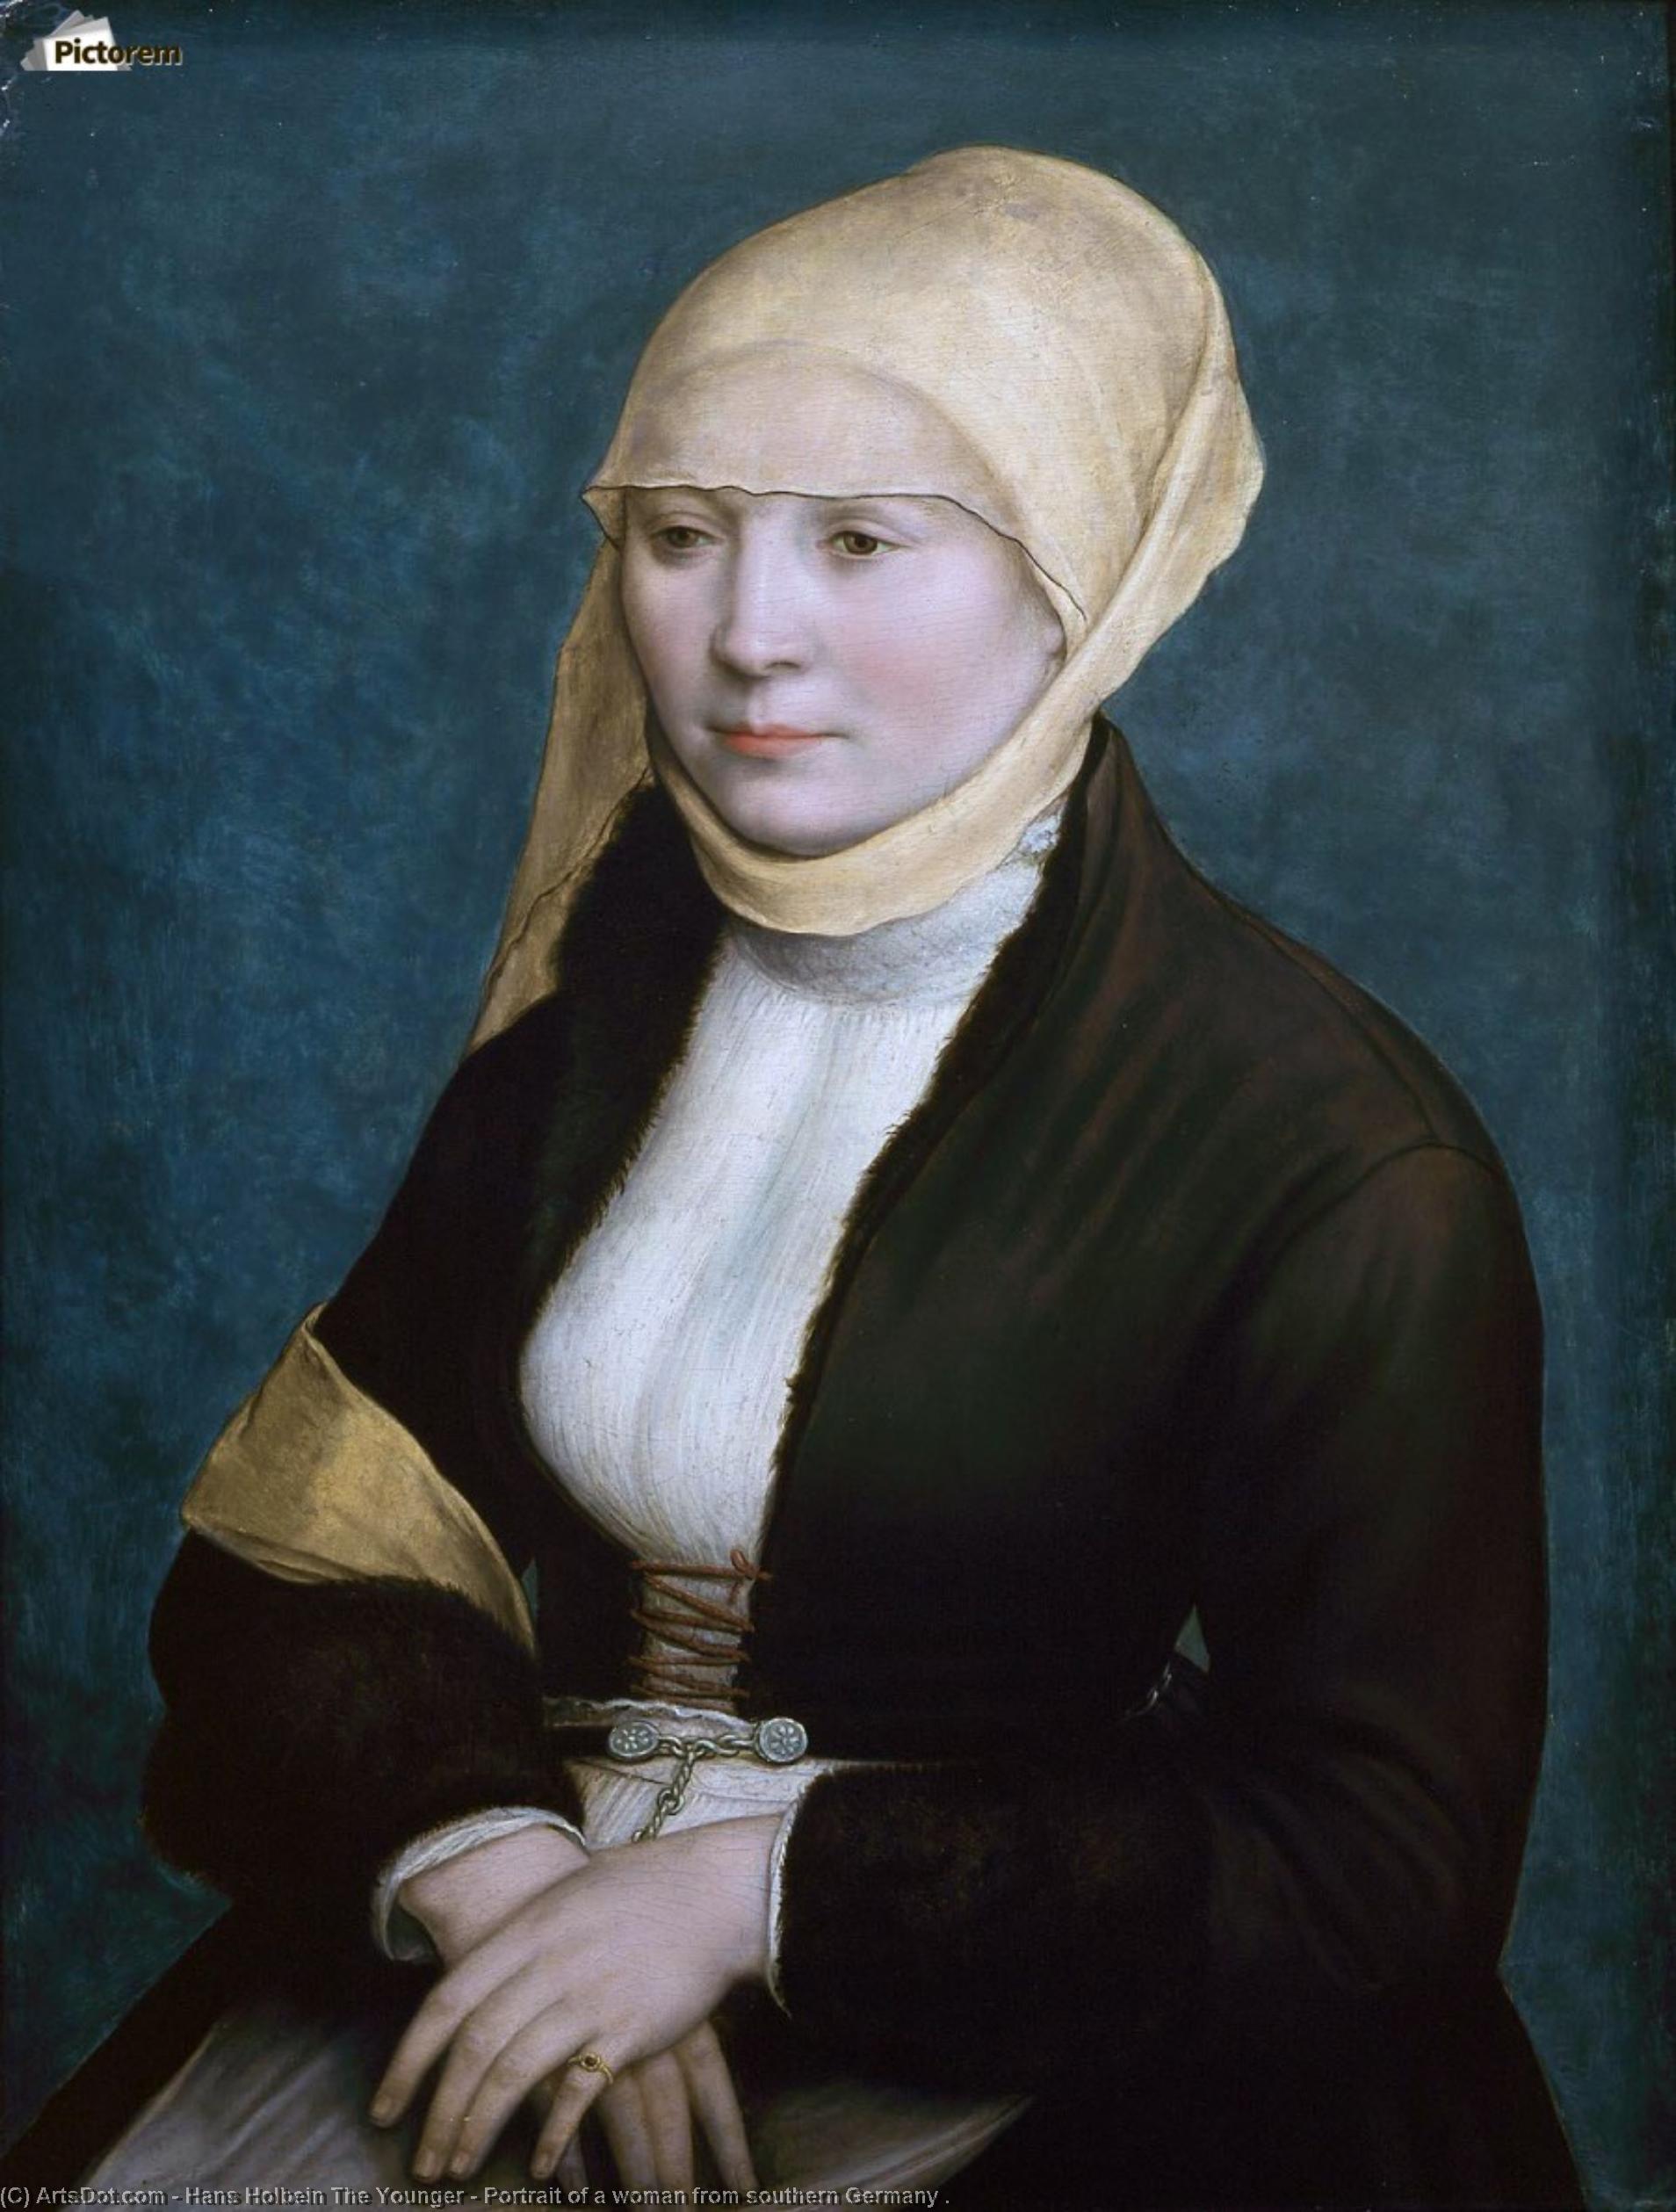 WikiOO.org - دایره المعارف هنرهای زیبا - نقاشی، آثار هنری Hans Holbein The Younger - Portrait of a woman from southern Germany .